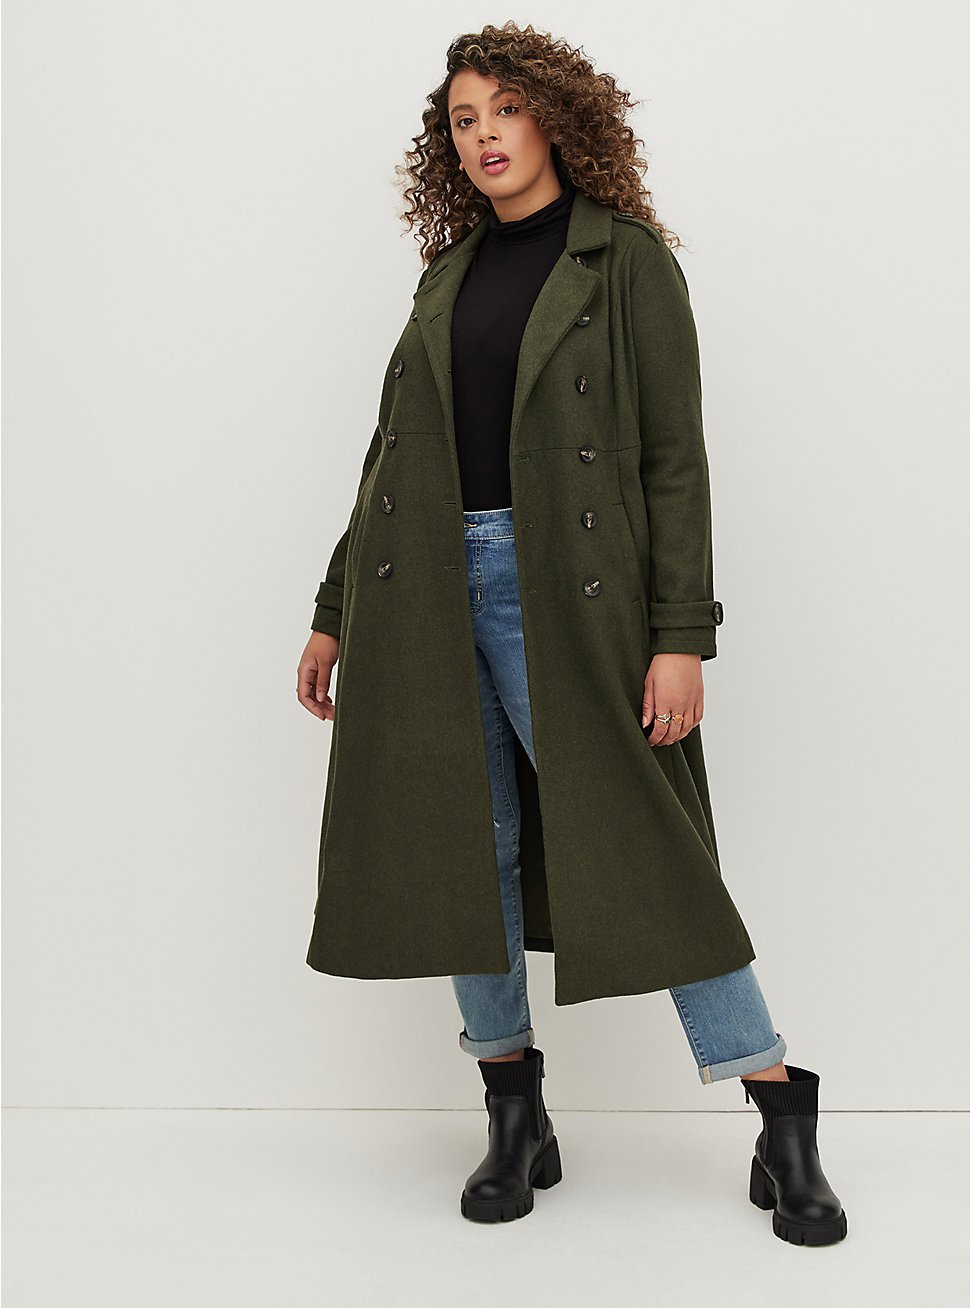 Plus Size Fit & Flare Military Coat - Wool Olive Green, DEEP DEPTHS, hi-res